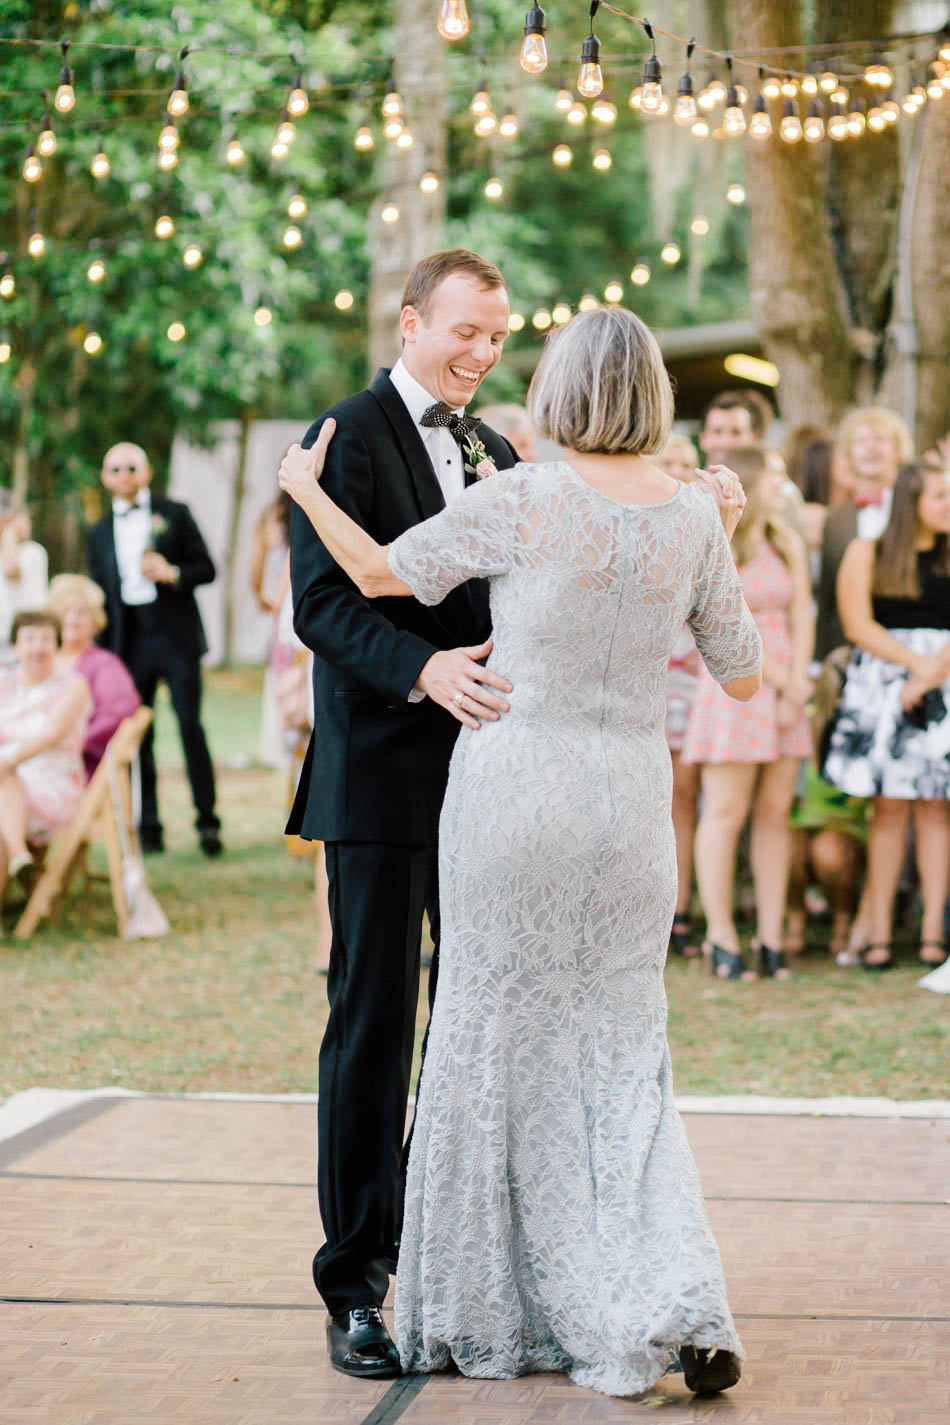 Groom dances with mother, Wadmalaw Island, South Carolina Kate Timbers Photography. http://katetimbers.com #katetimbersphotography // Charleston Photography // Inspiration